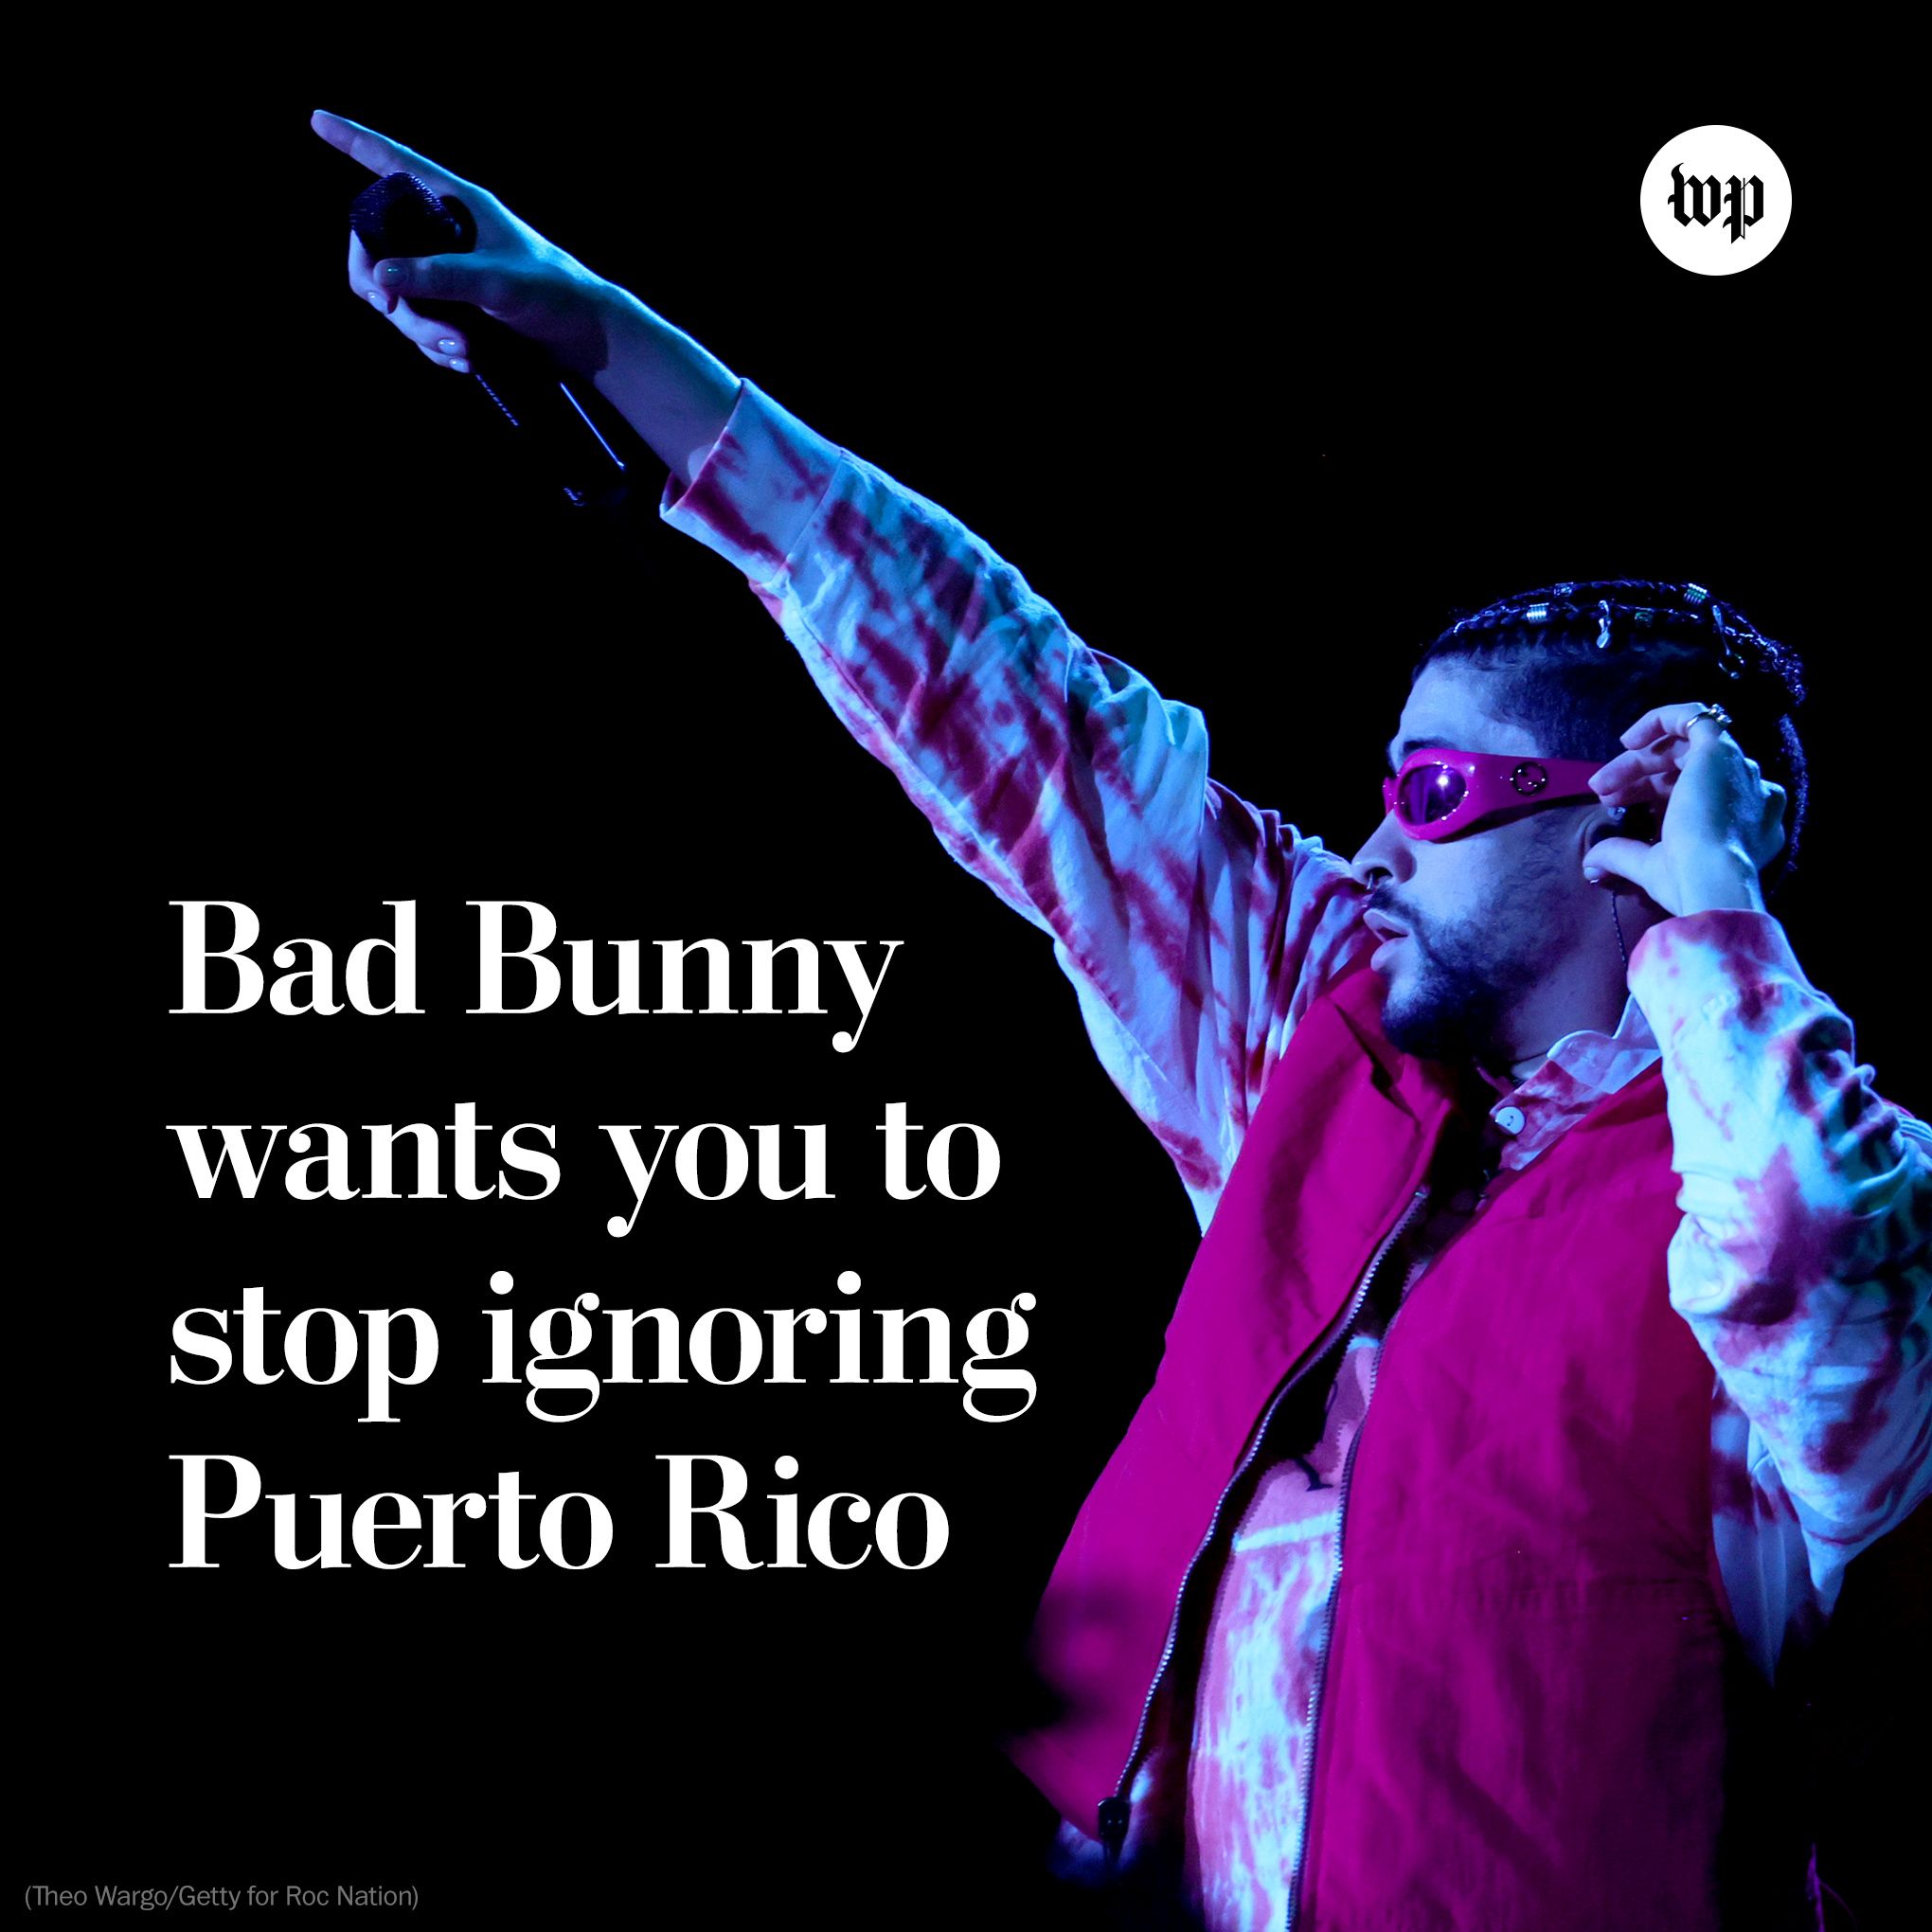 As A Puerto Rican, I Can't Stop Crying Over Bad Bunny Winning The